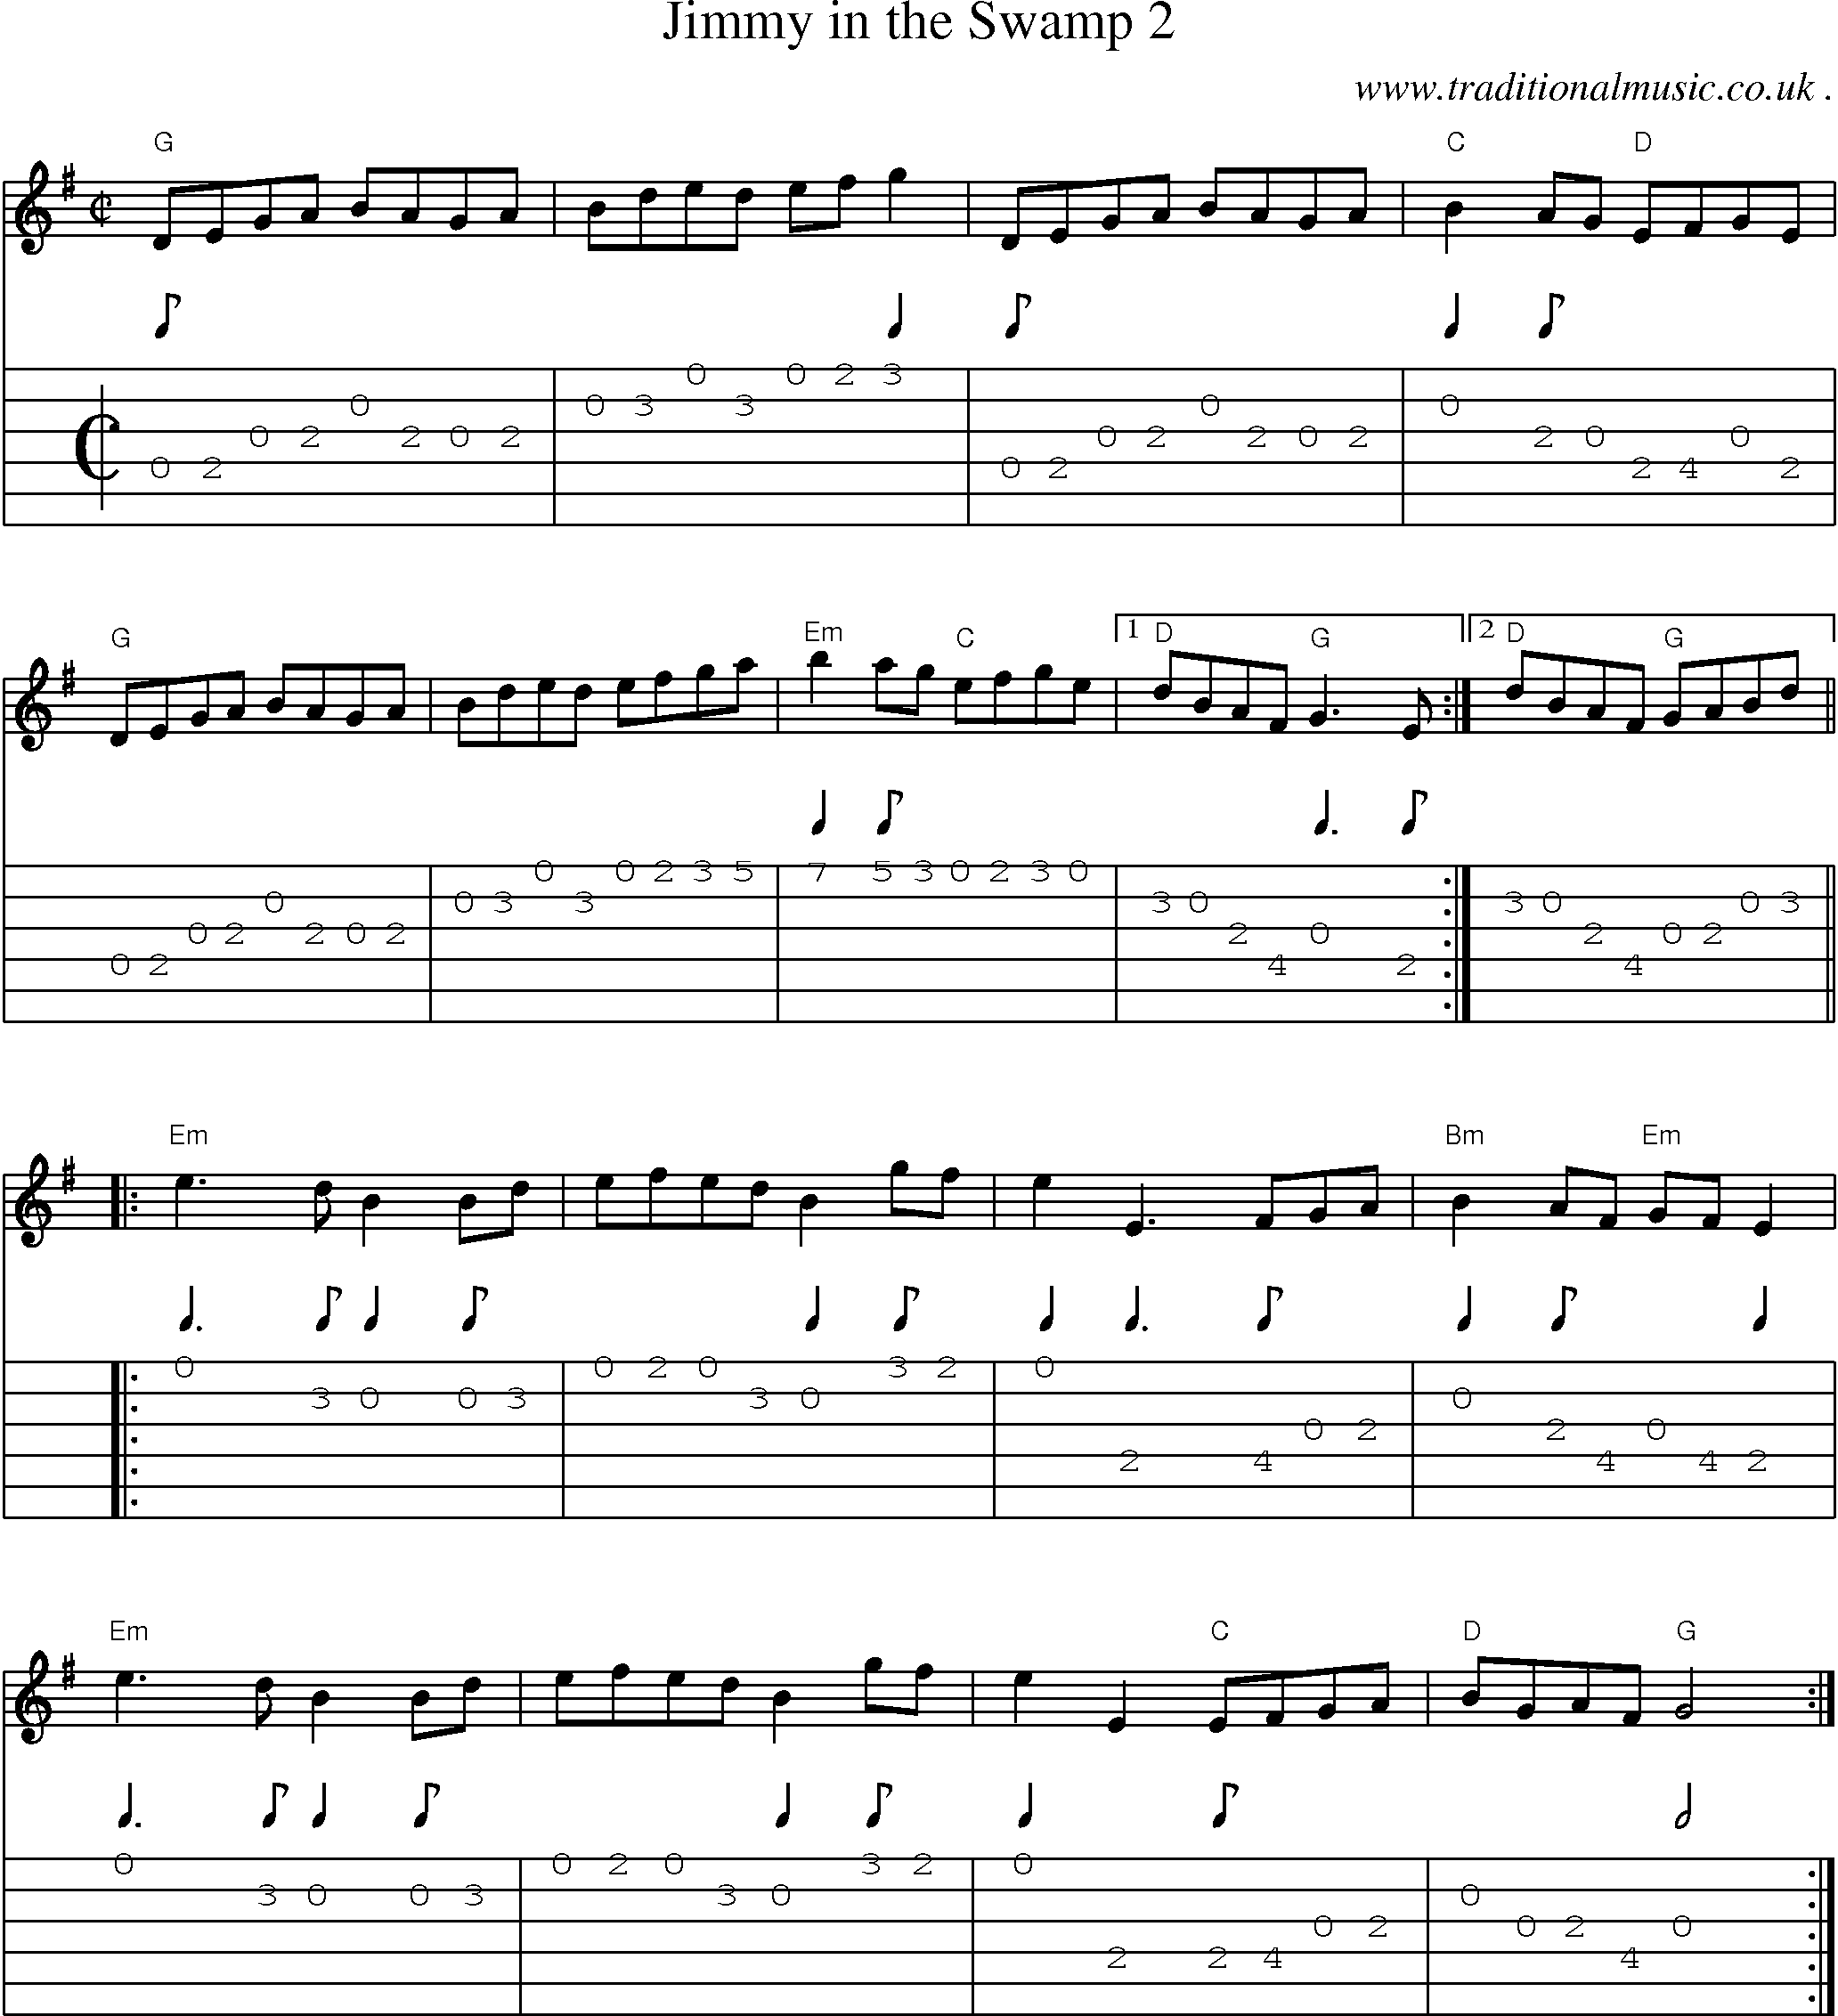 Music Score and Guitar Tabs for Jimmy In The Swamp 2